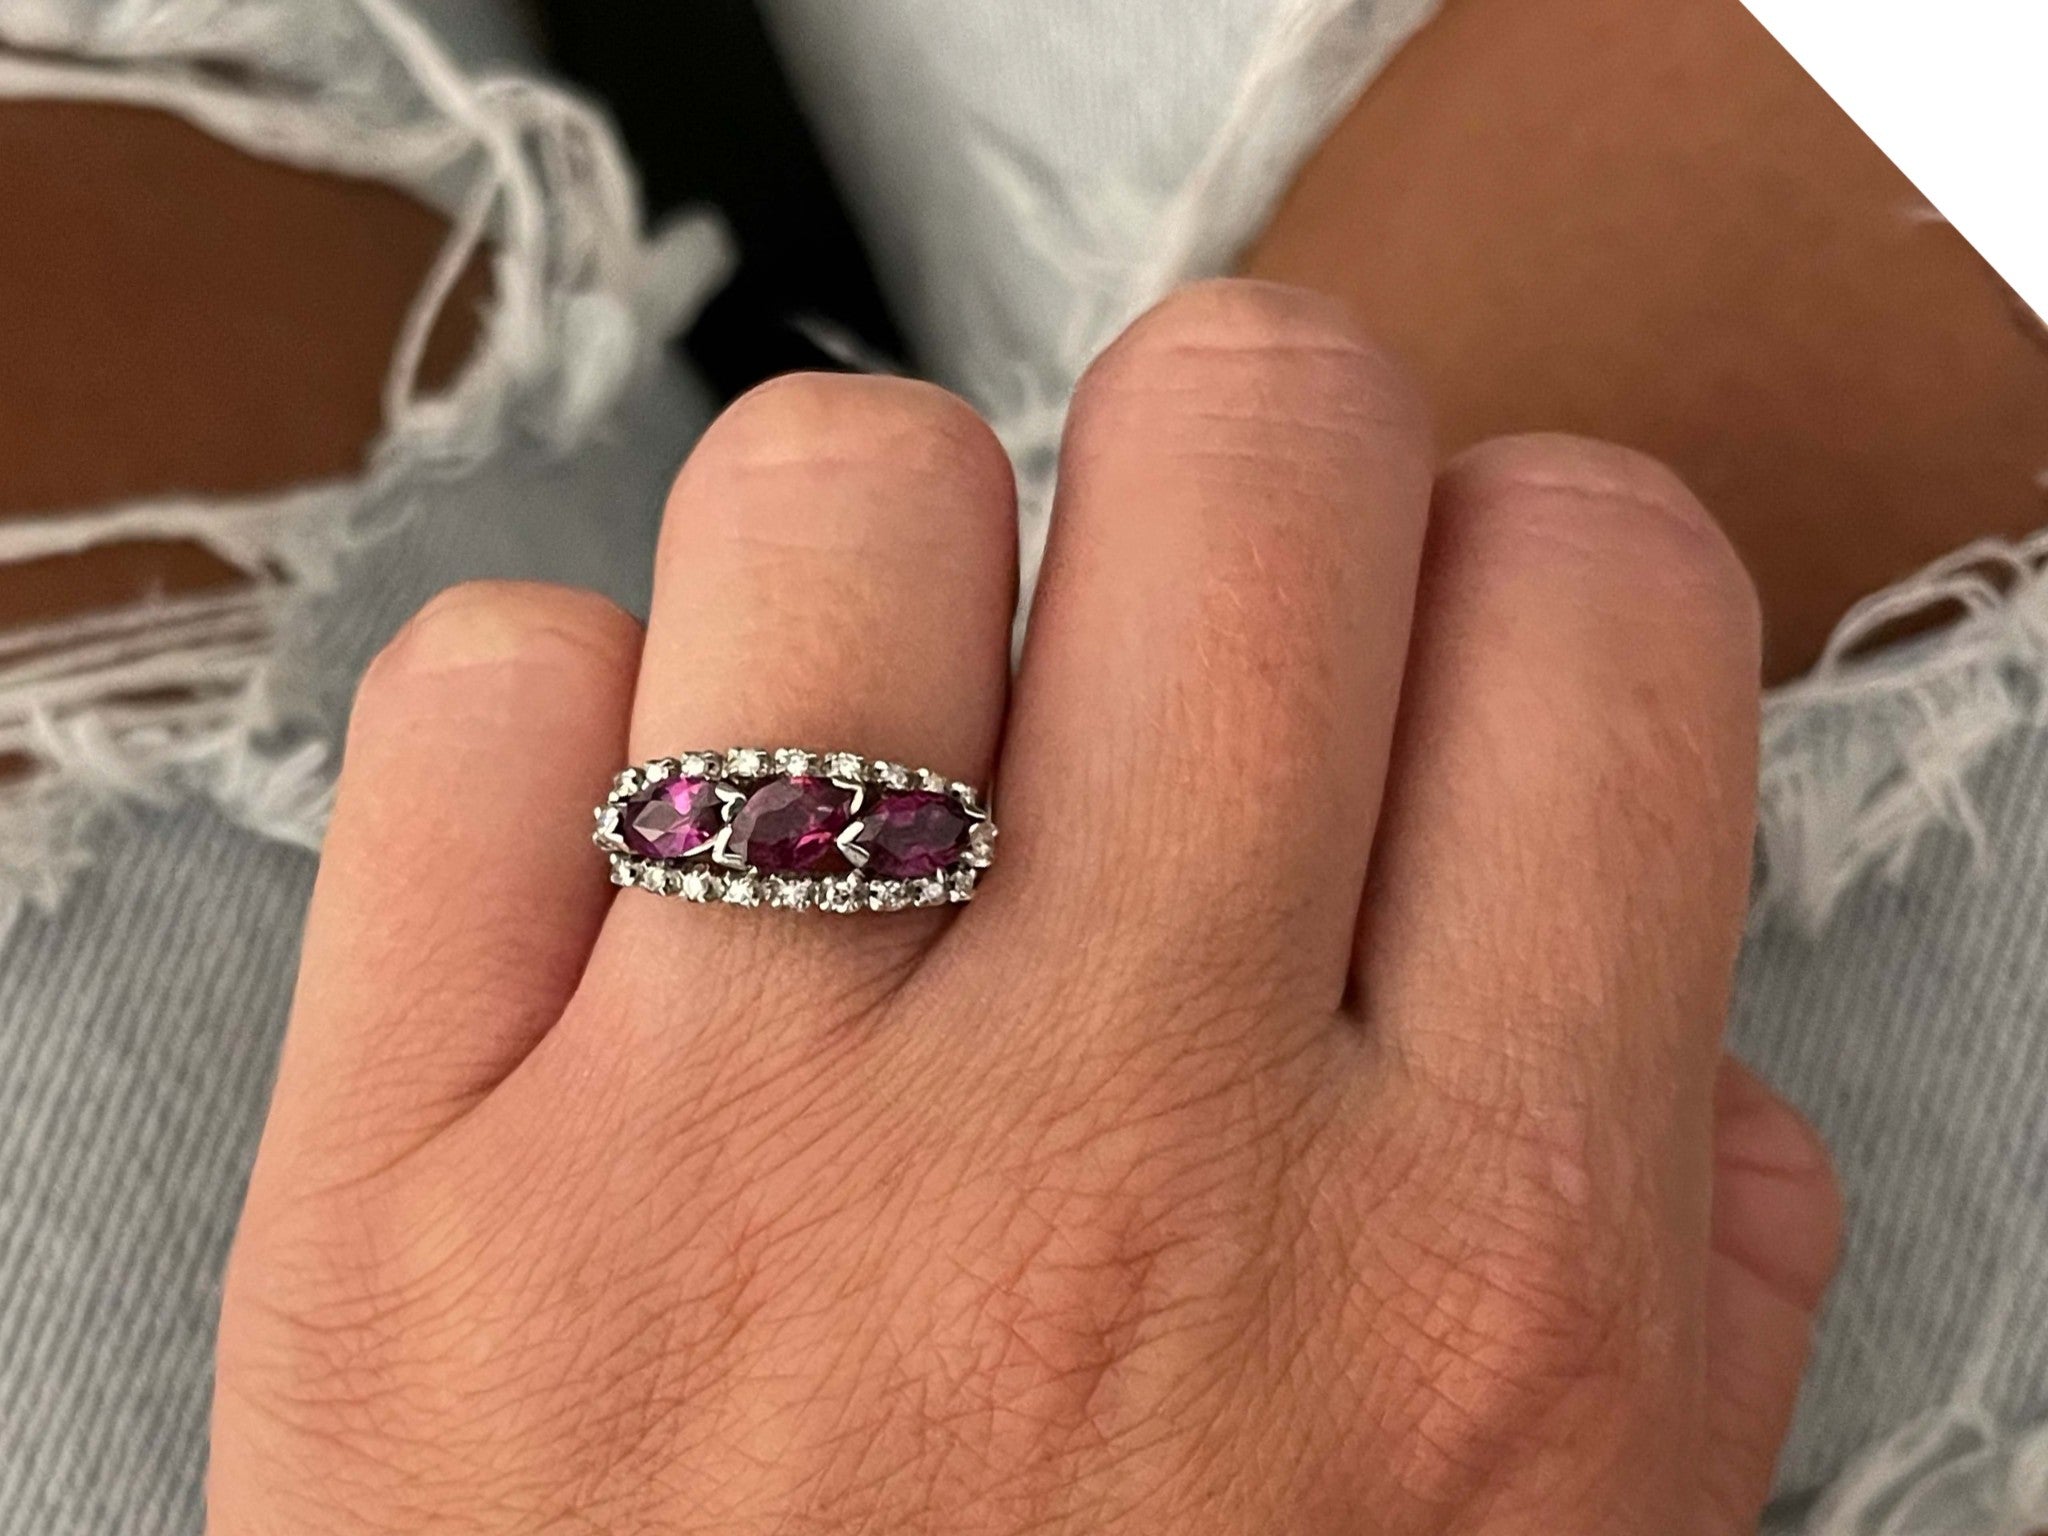 Three Marquis Red Rubies and Diamond Halo Ring in 18k White Gold